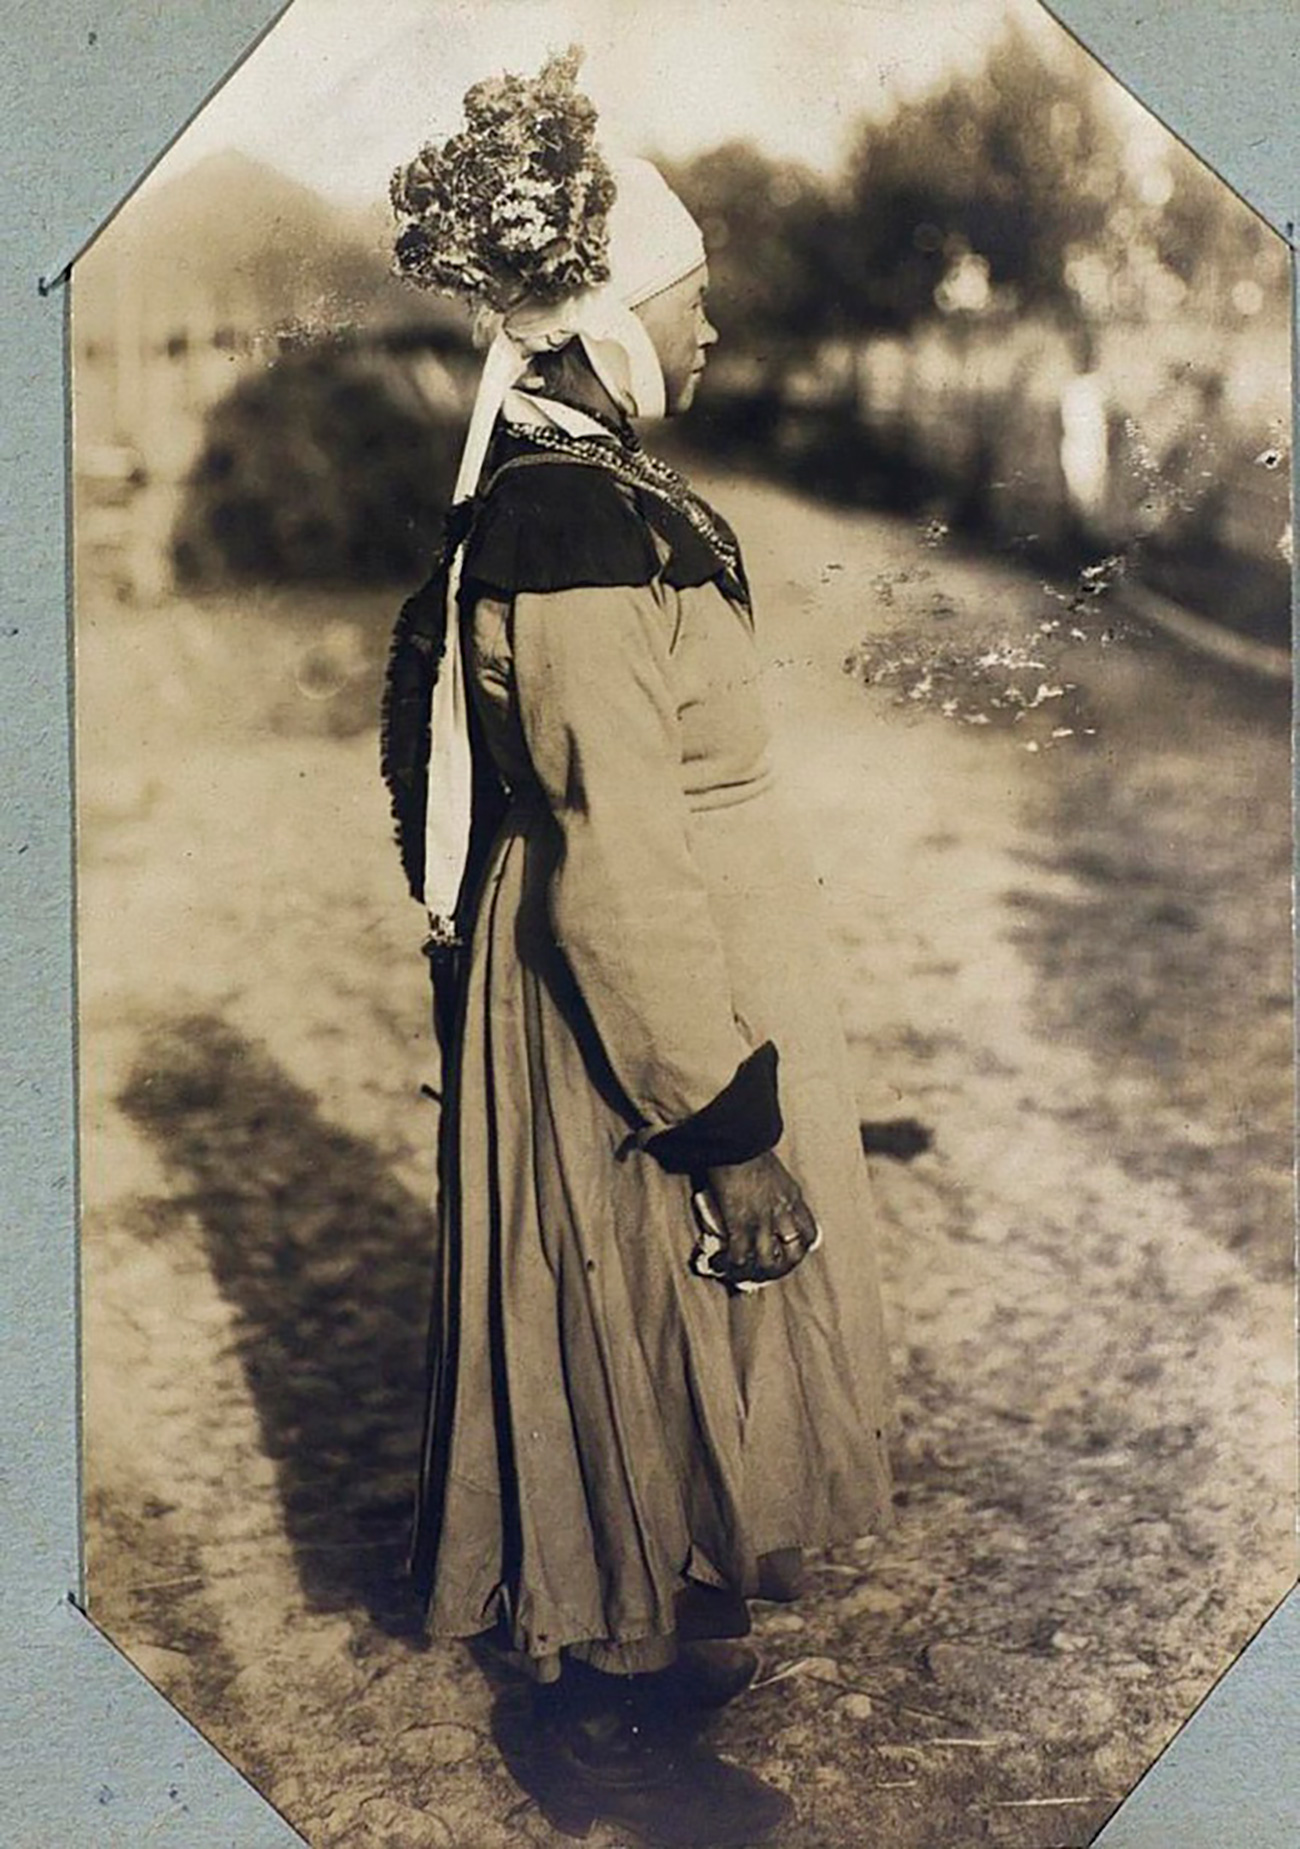 Woman dressed as a bride on her way to be chosen, 1902.